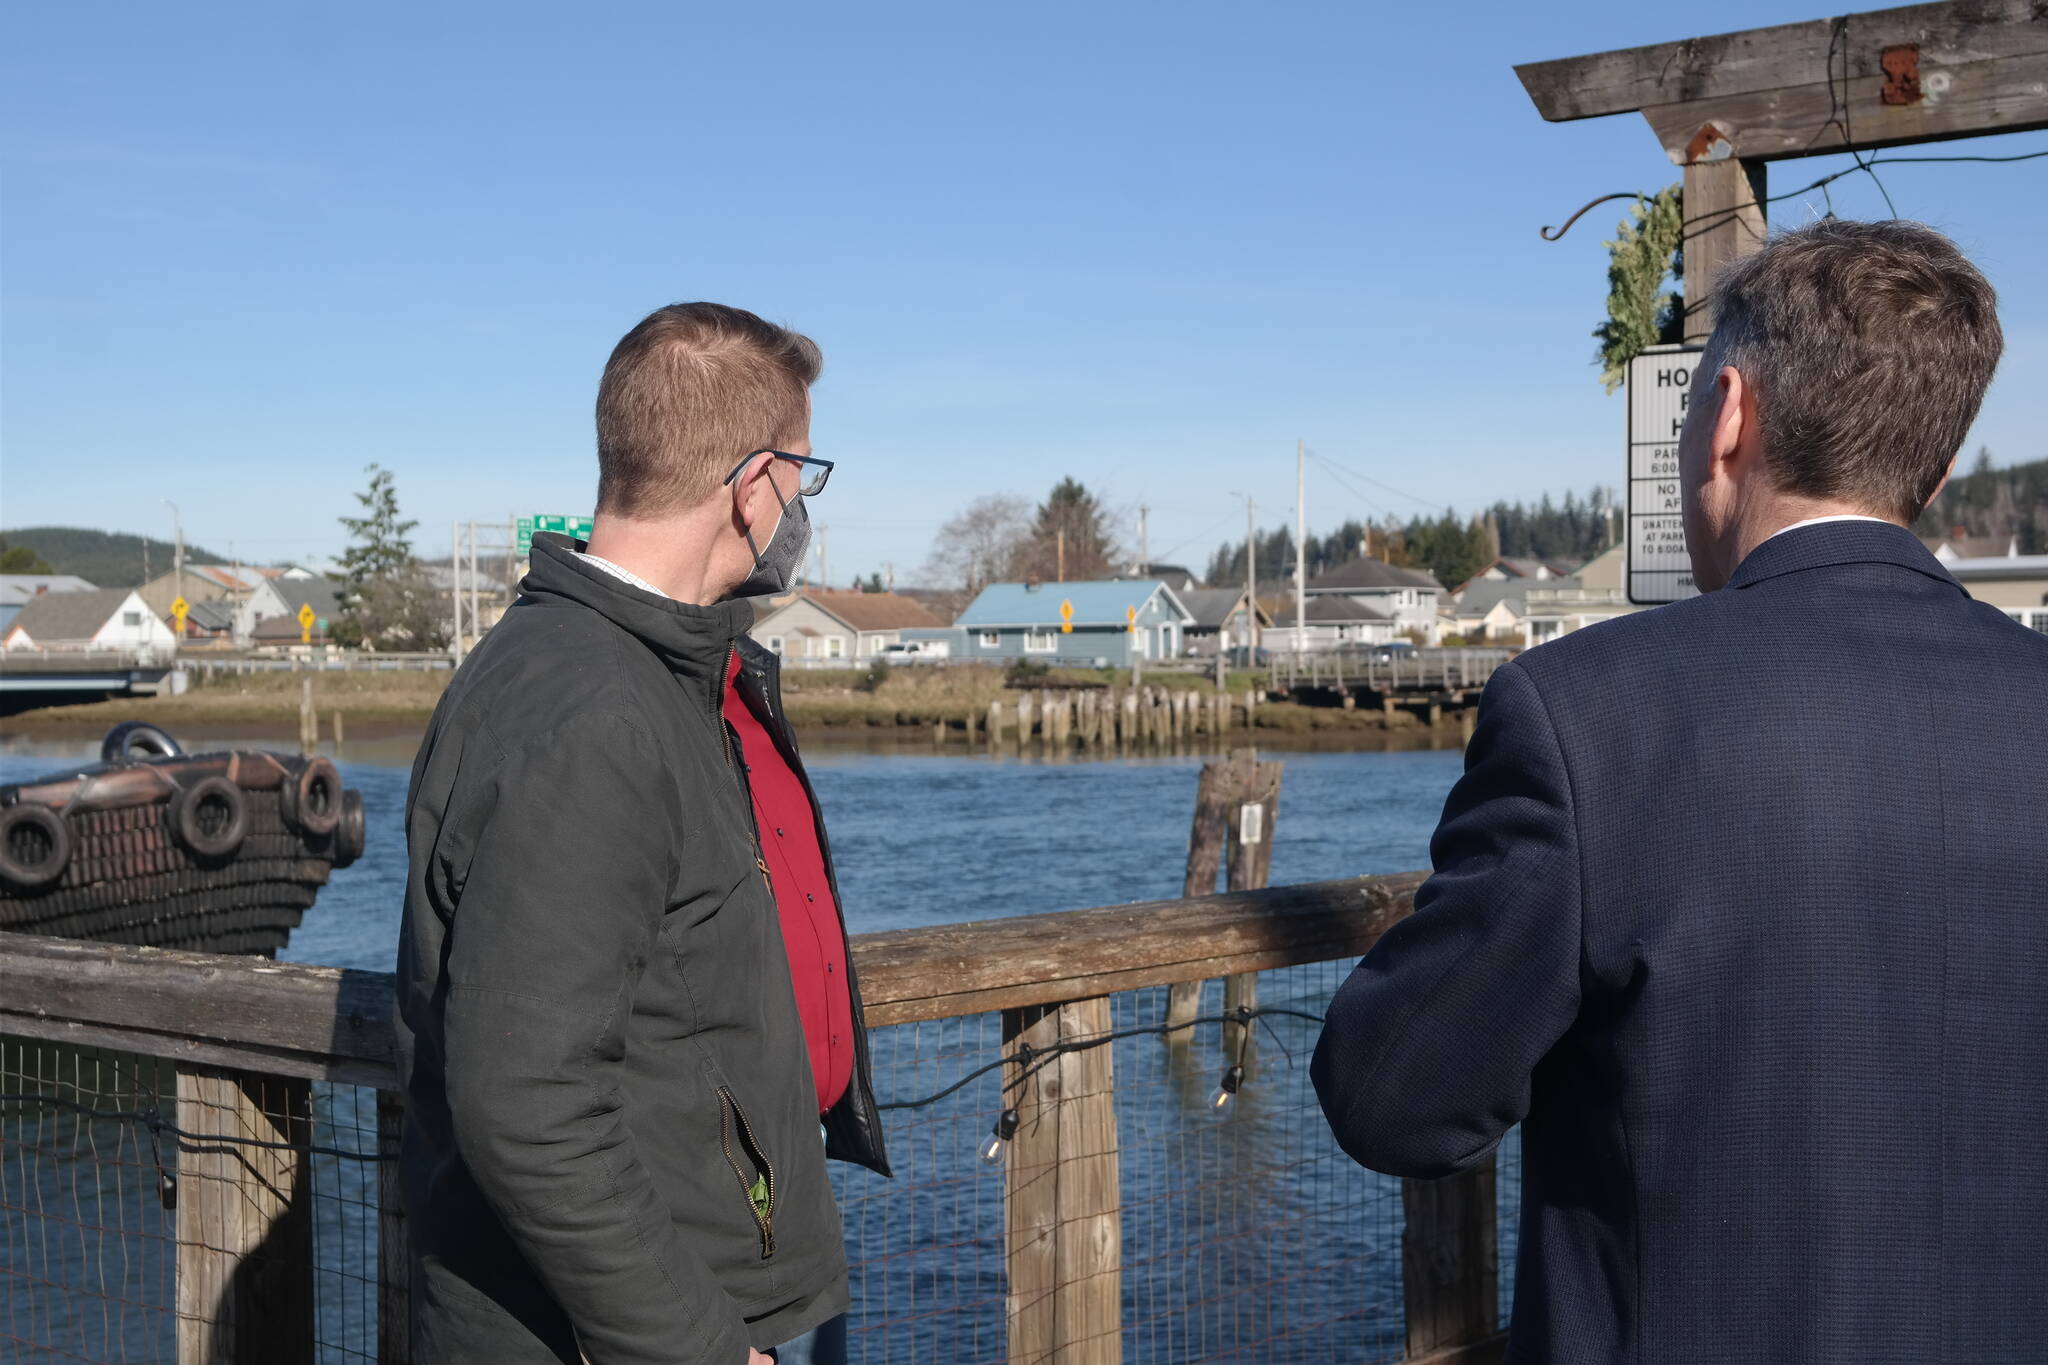 Rep. Kilmer (D-WA06) toured downtown Hoquiam with City Administrator Brian Shay and Mayor Ben Winkleman on Friday, Feb. 25, 2022. A stop along Levee Street provided a view of the proposed area for the North Shore Levee–West Segment along the Hoquiam River. Erika Gebhardt I The Daily World